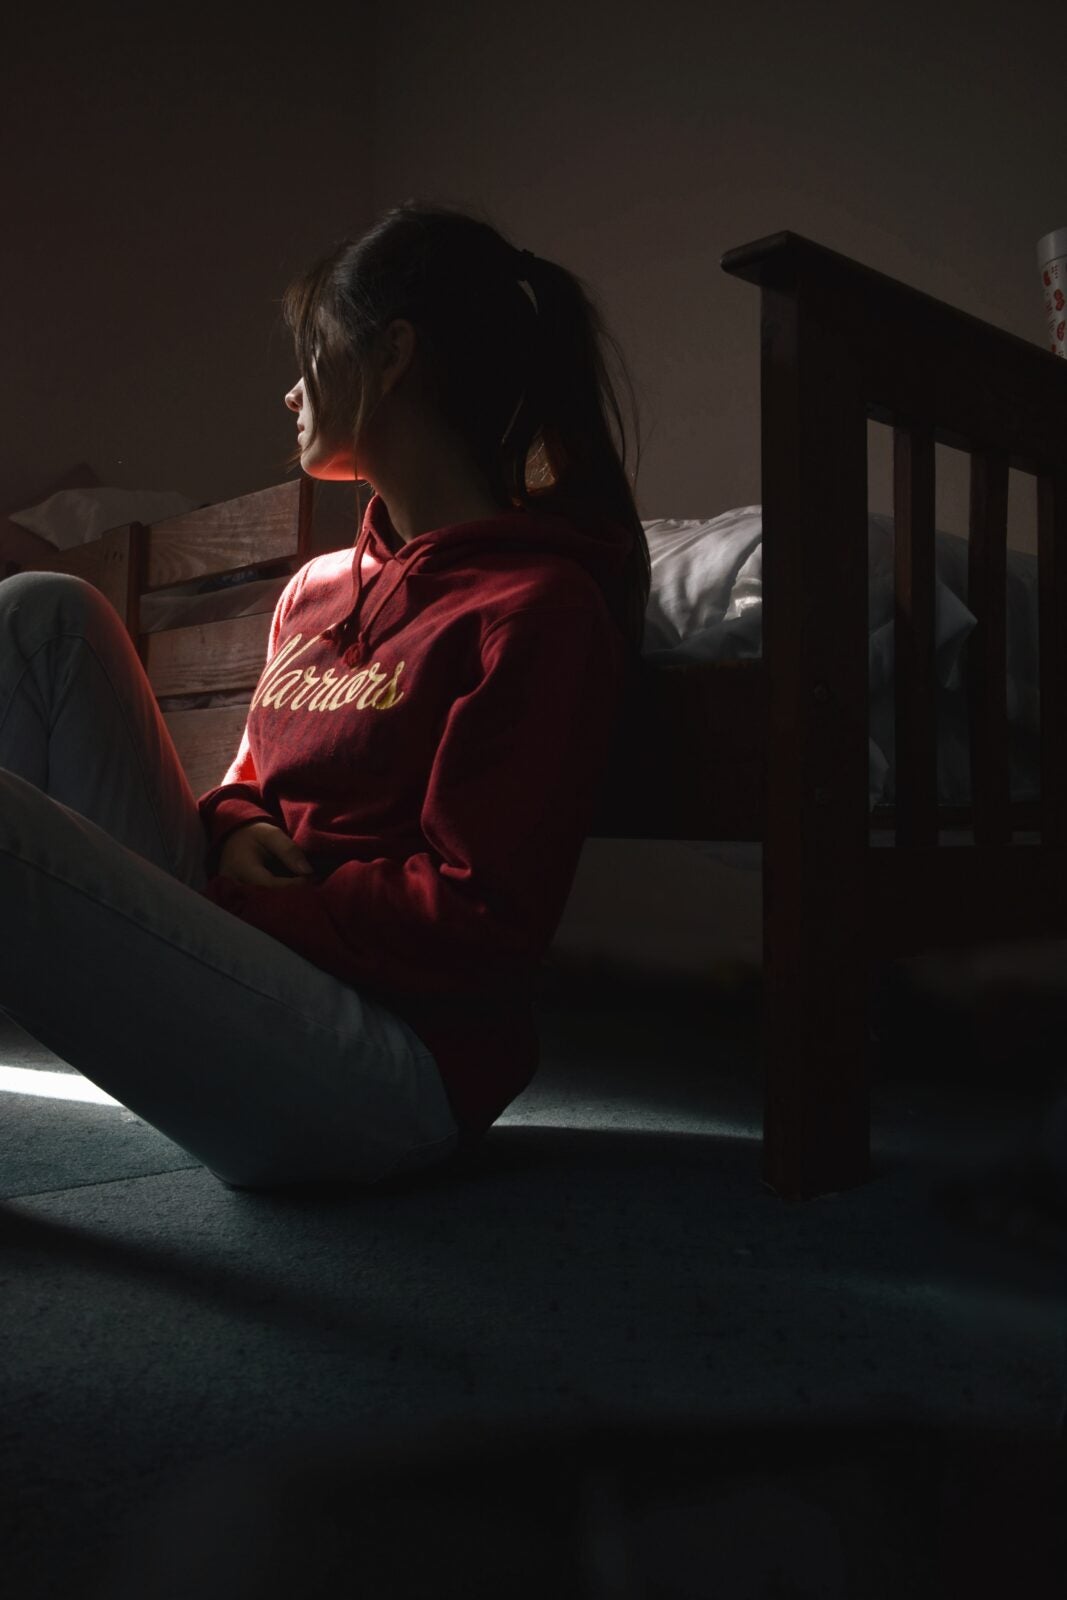 A woman wearing a red long sleeve shirt and white pants, sitting on the floor by the bed while looking out towards a light source.